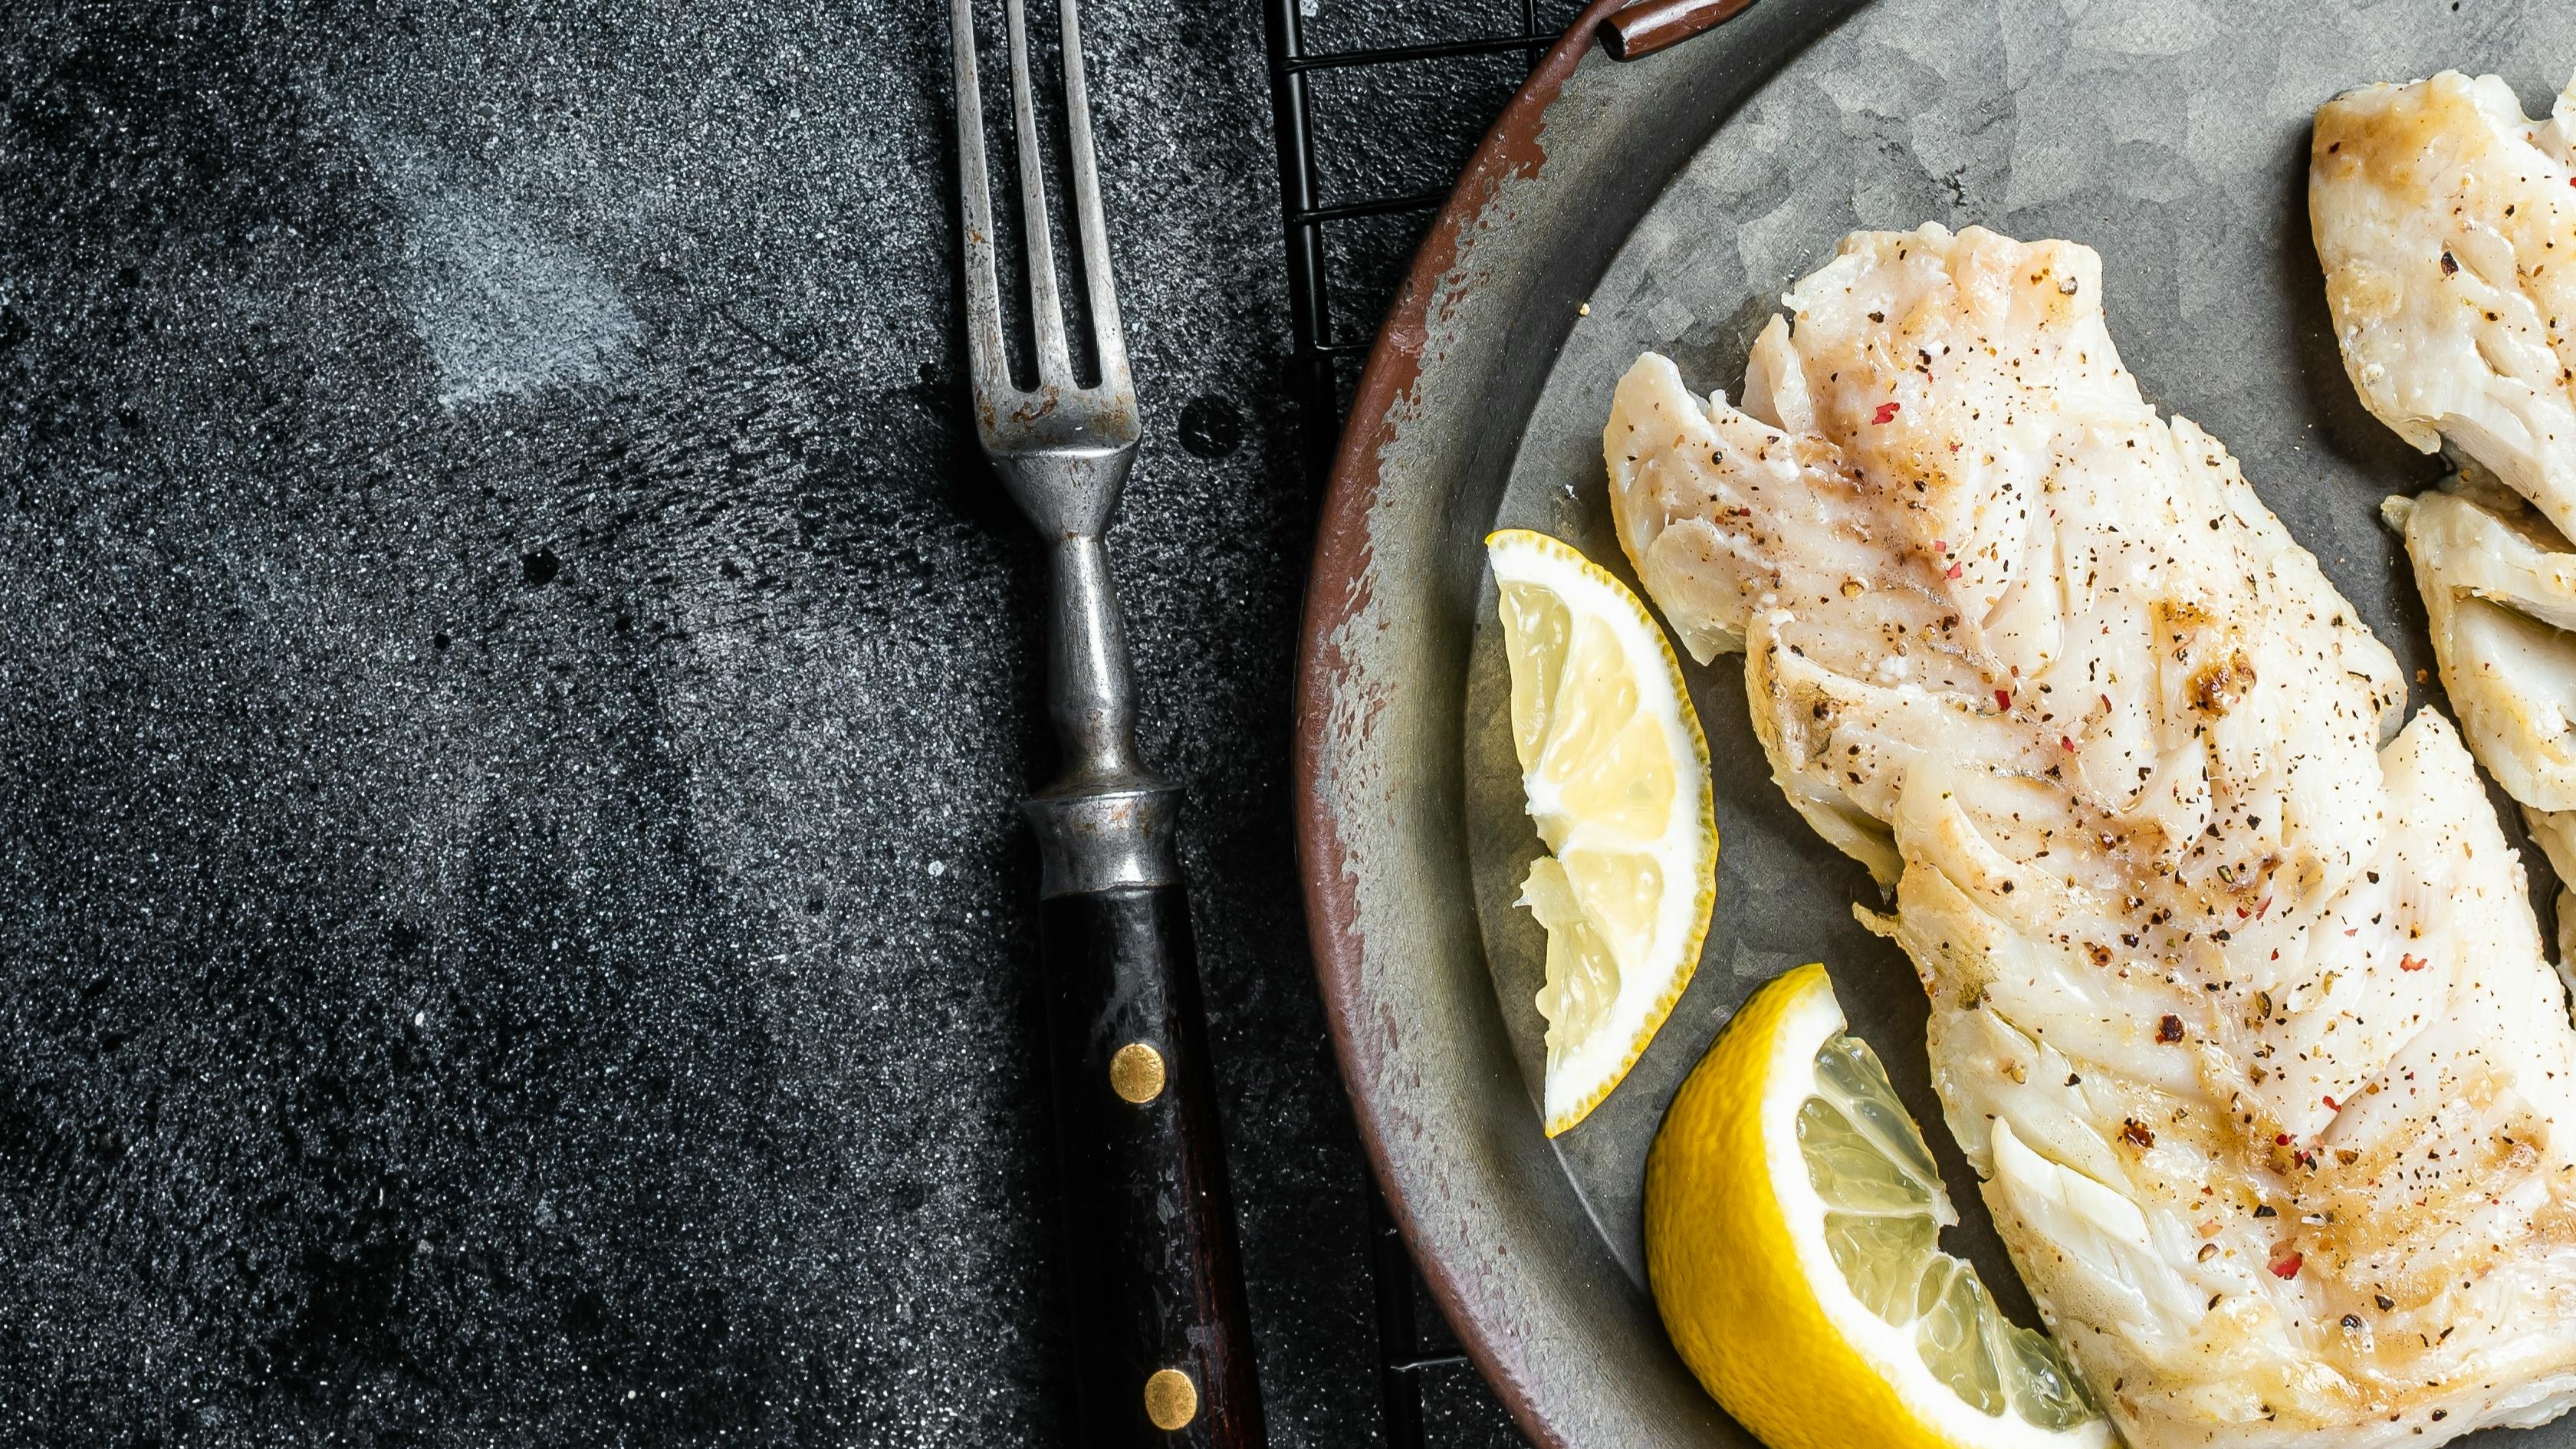 Pan seared cod makes for a beautiful at-home restaurant worthy meal